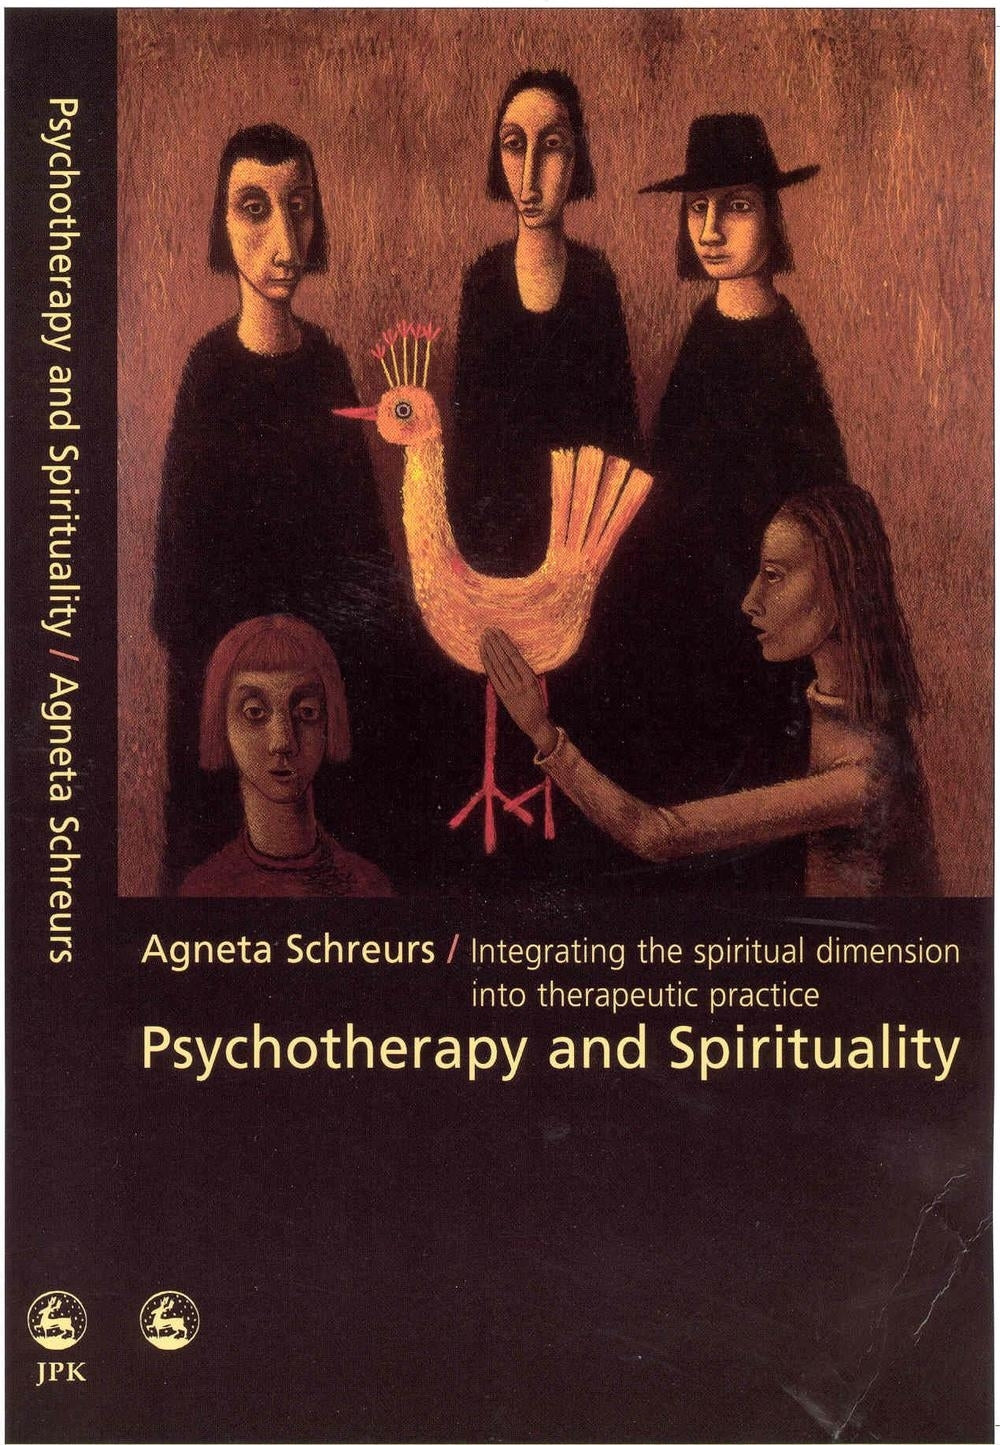 Psychotherapy and Spirituality by Malcolm Pines, Agneta Schreurs